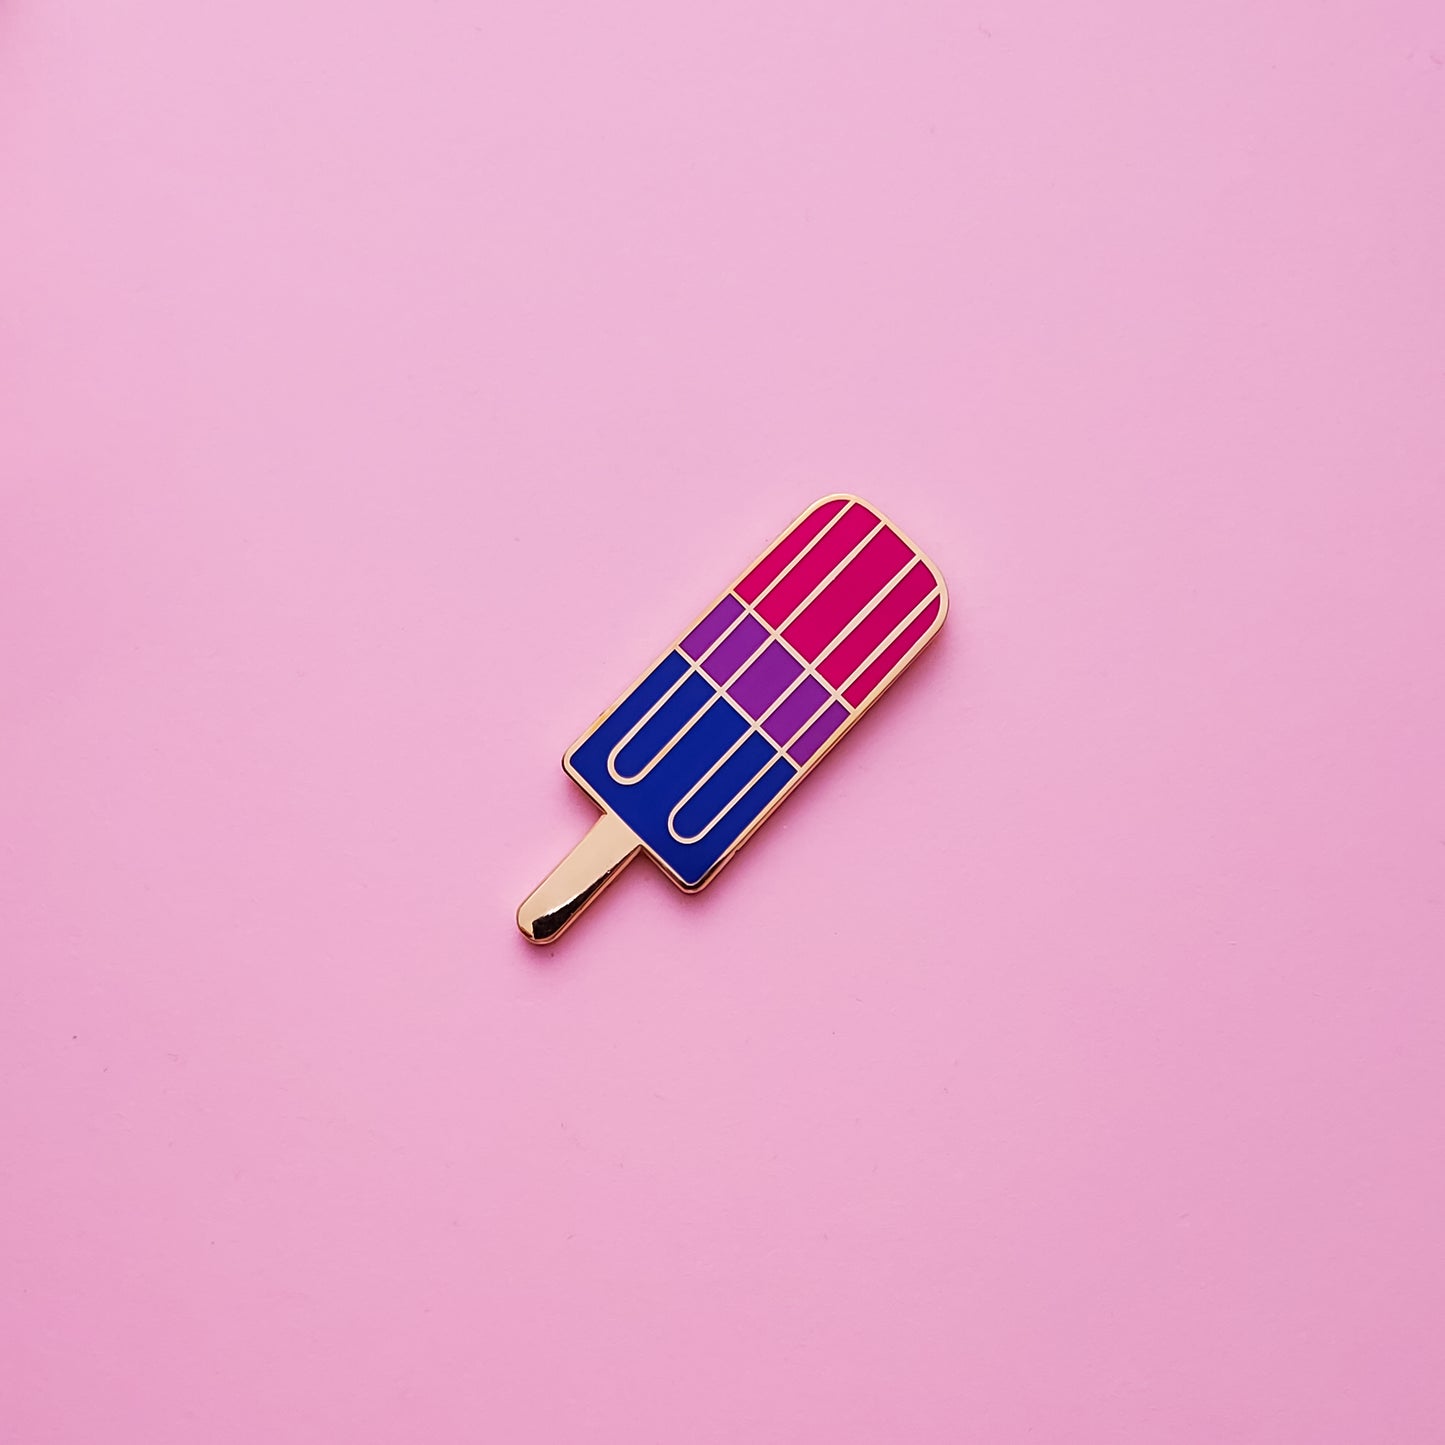 Bisexual Pride Popsicle Pin on a pink background. Pin is has vibrant bisexual pride colours set in a polished nickle metal. Bisexual pride pin colours are pink, purple and blue.Bisexual Popsicle Pin - LGBTQ Pins Canada | Little Rainbow Paper Co